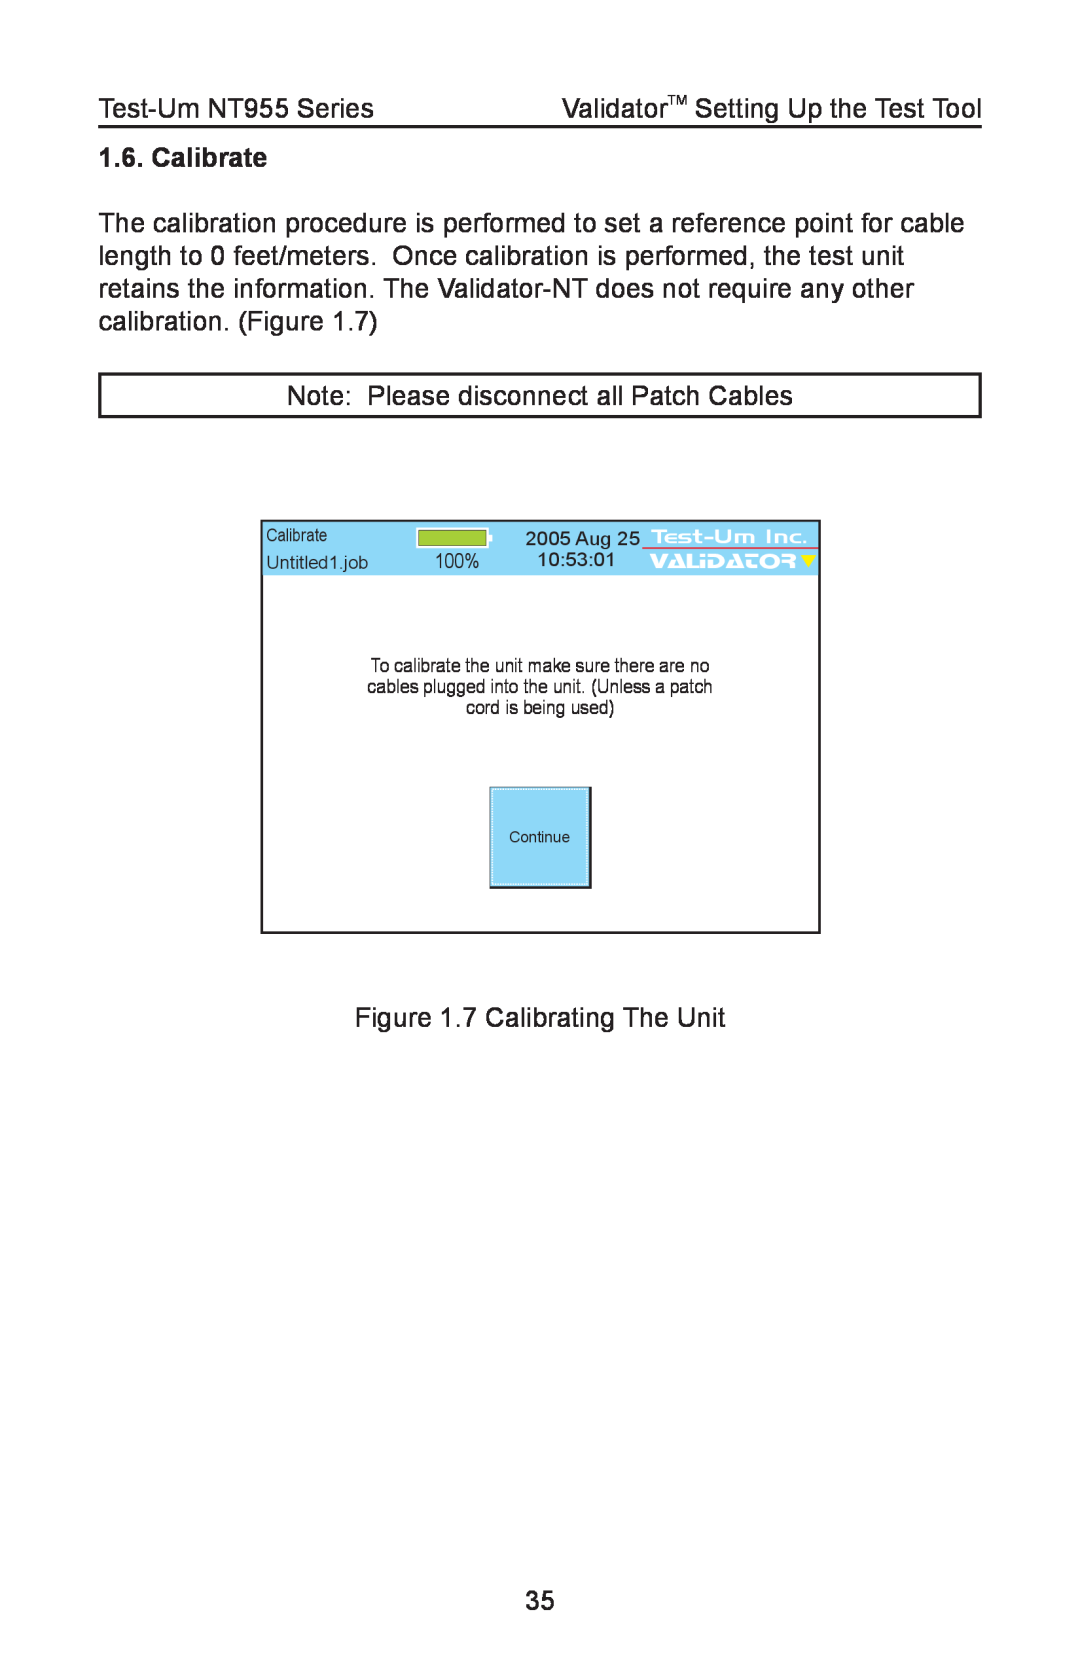 Test-Um NT955 operating instructions Calibrate, Continue 